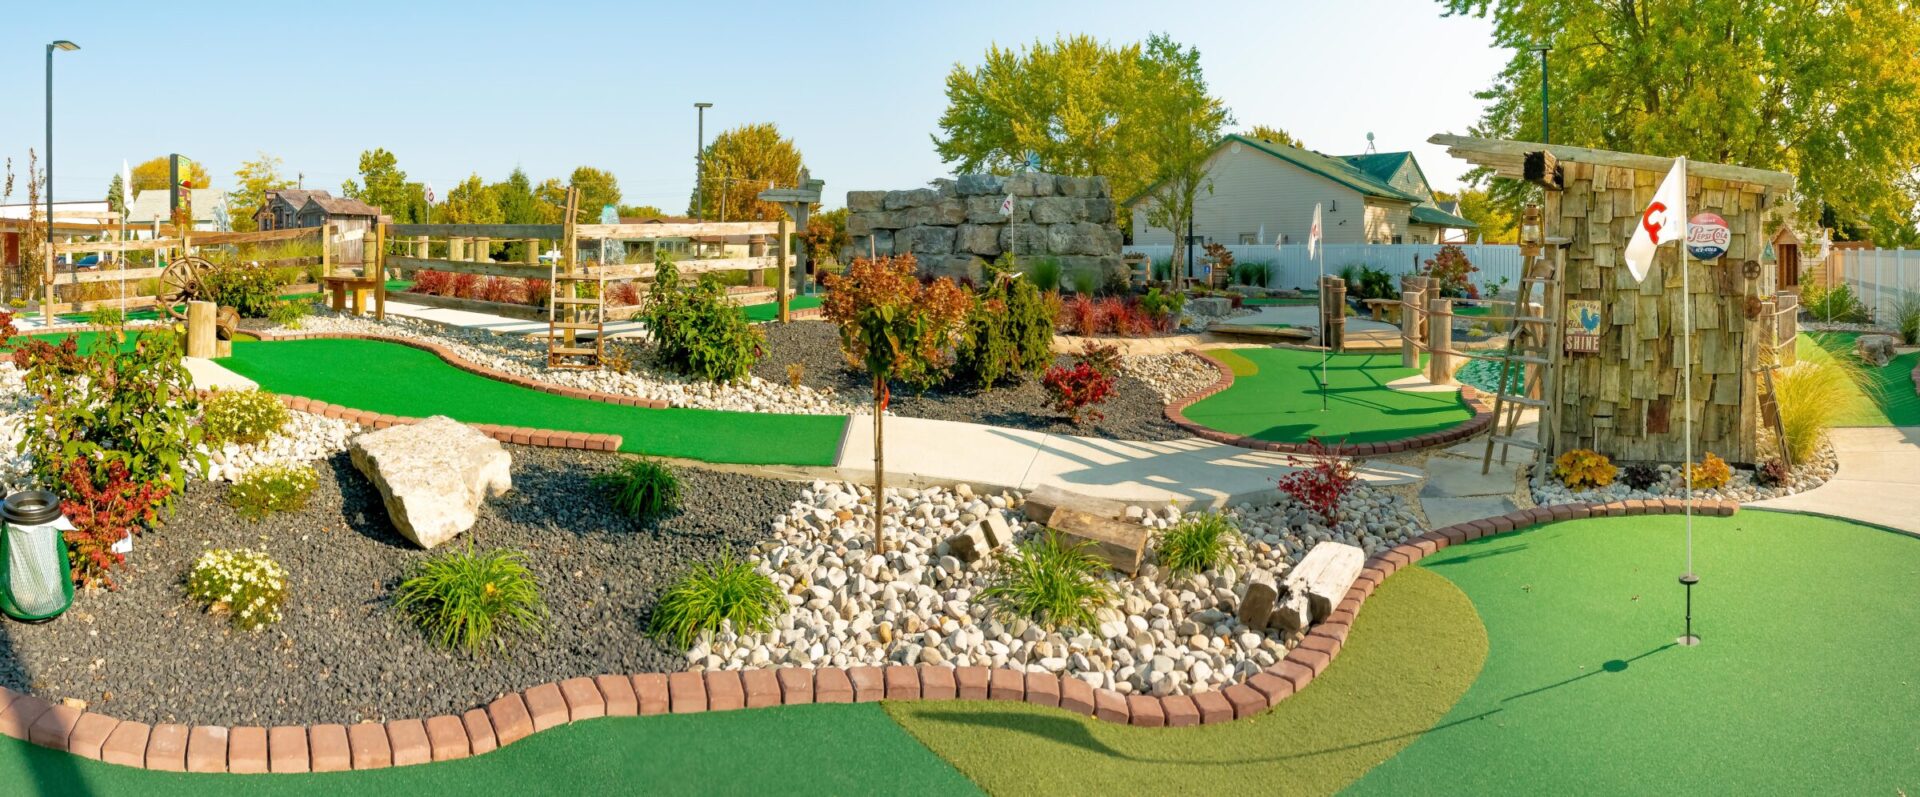 A panoramic view of a vibrant outdoor miniature golf course featuring green turf, rocks, shrubs, rustic decorations, and a clear blue sky above.